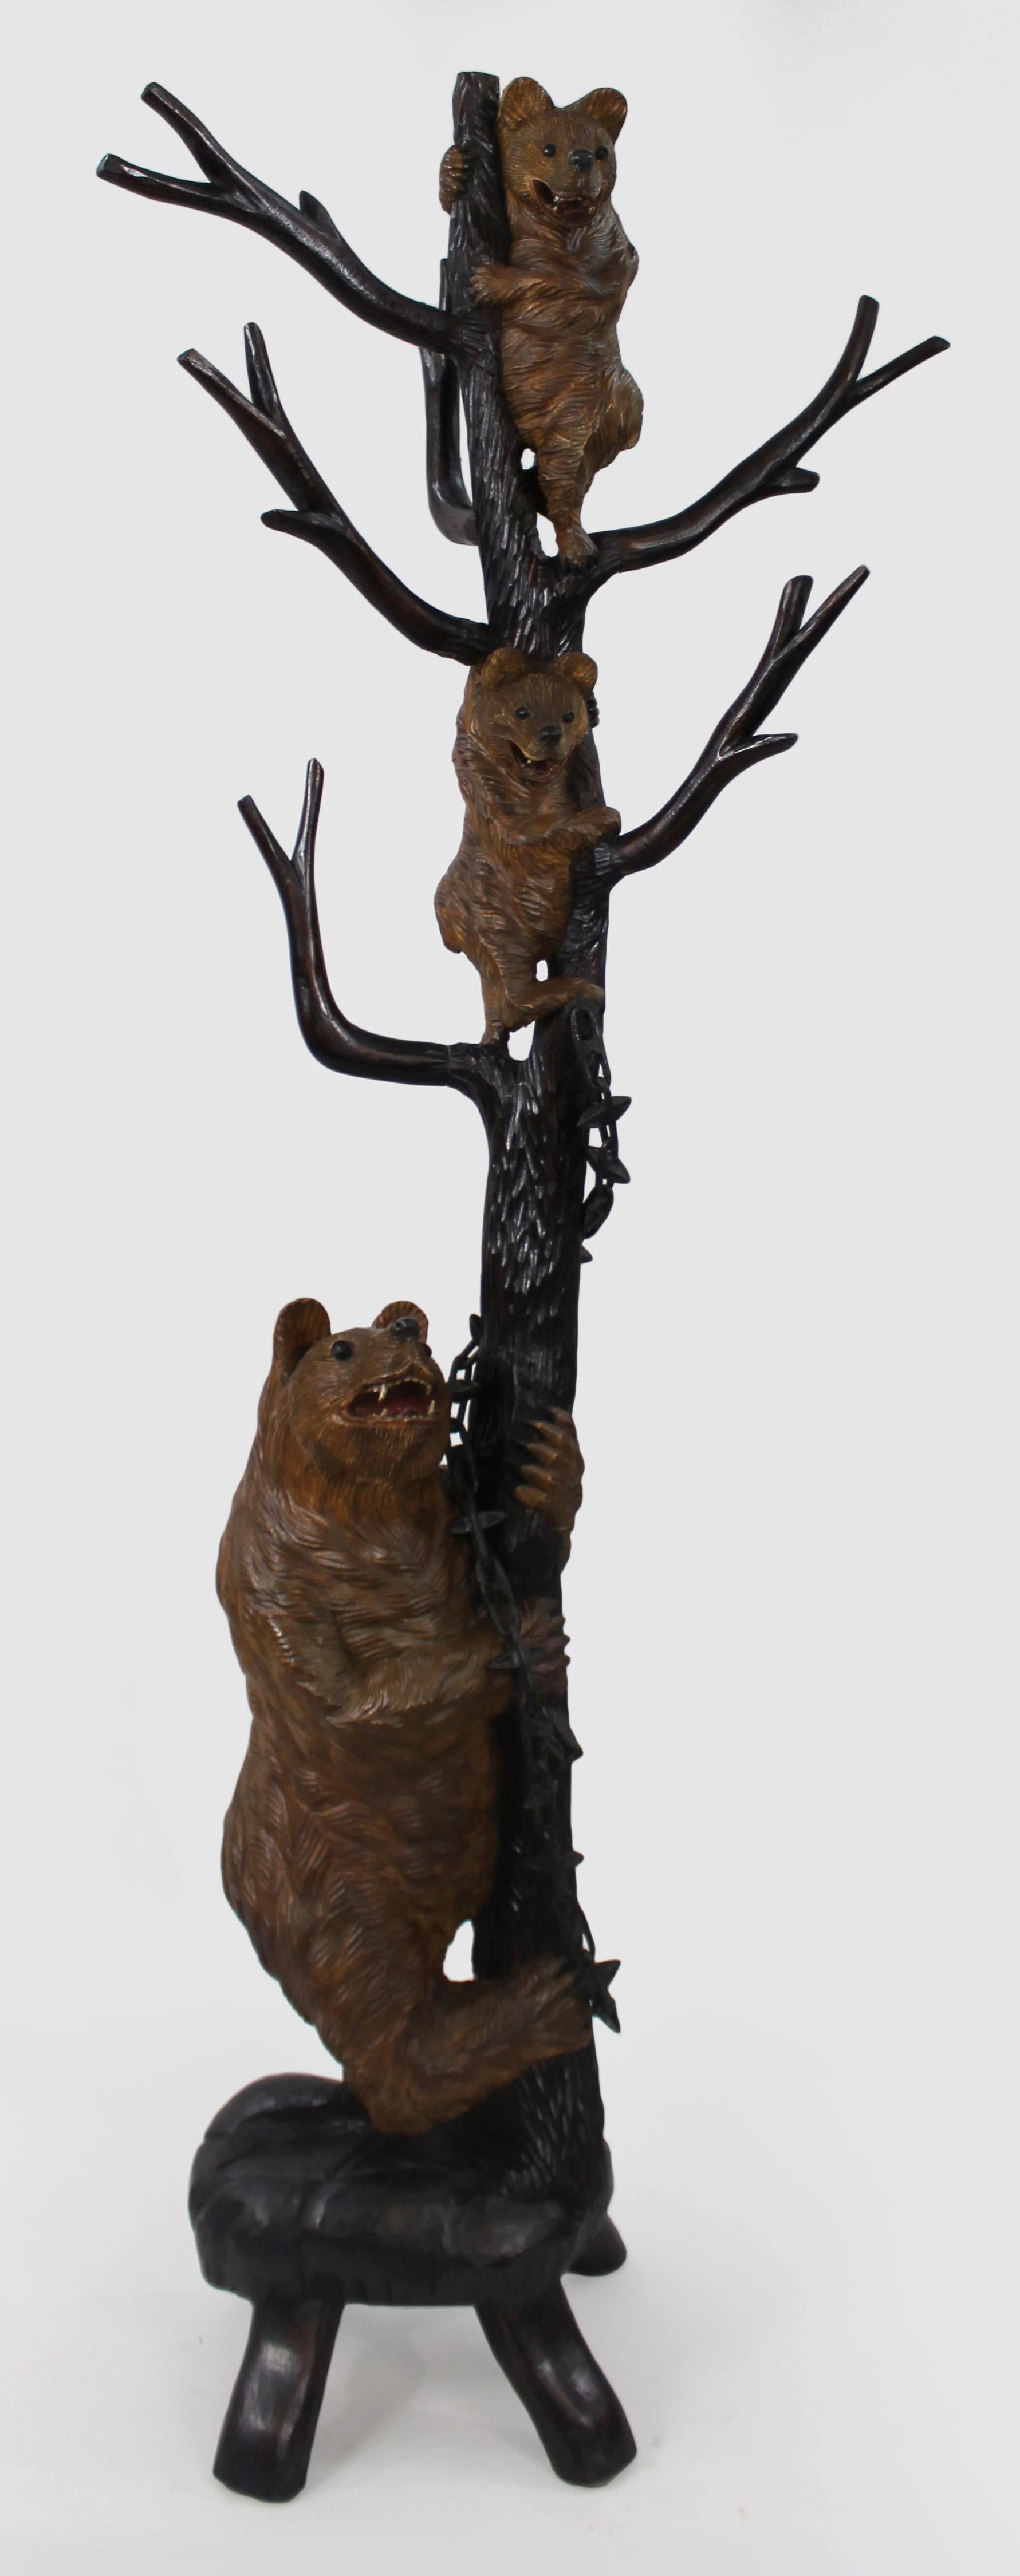 19th Century black forest carved bear coat stand

We are pleased to offer a superb late nineteenth century coat stand originating from the Black Forest.

Carved in the manner of a tree with three bears, the mother at the base and two cubs